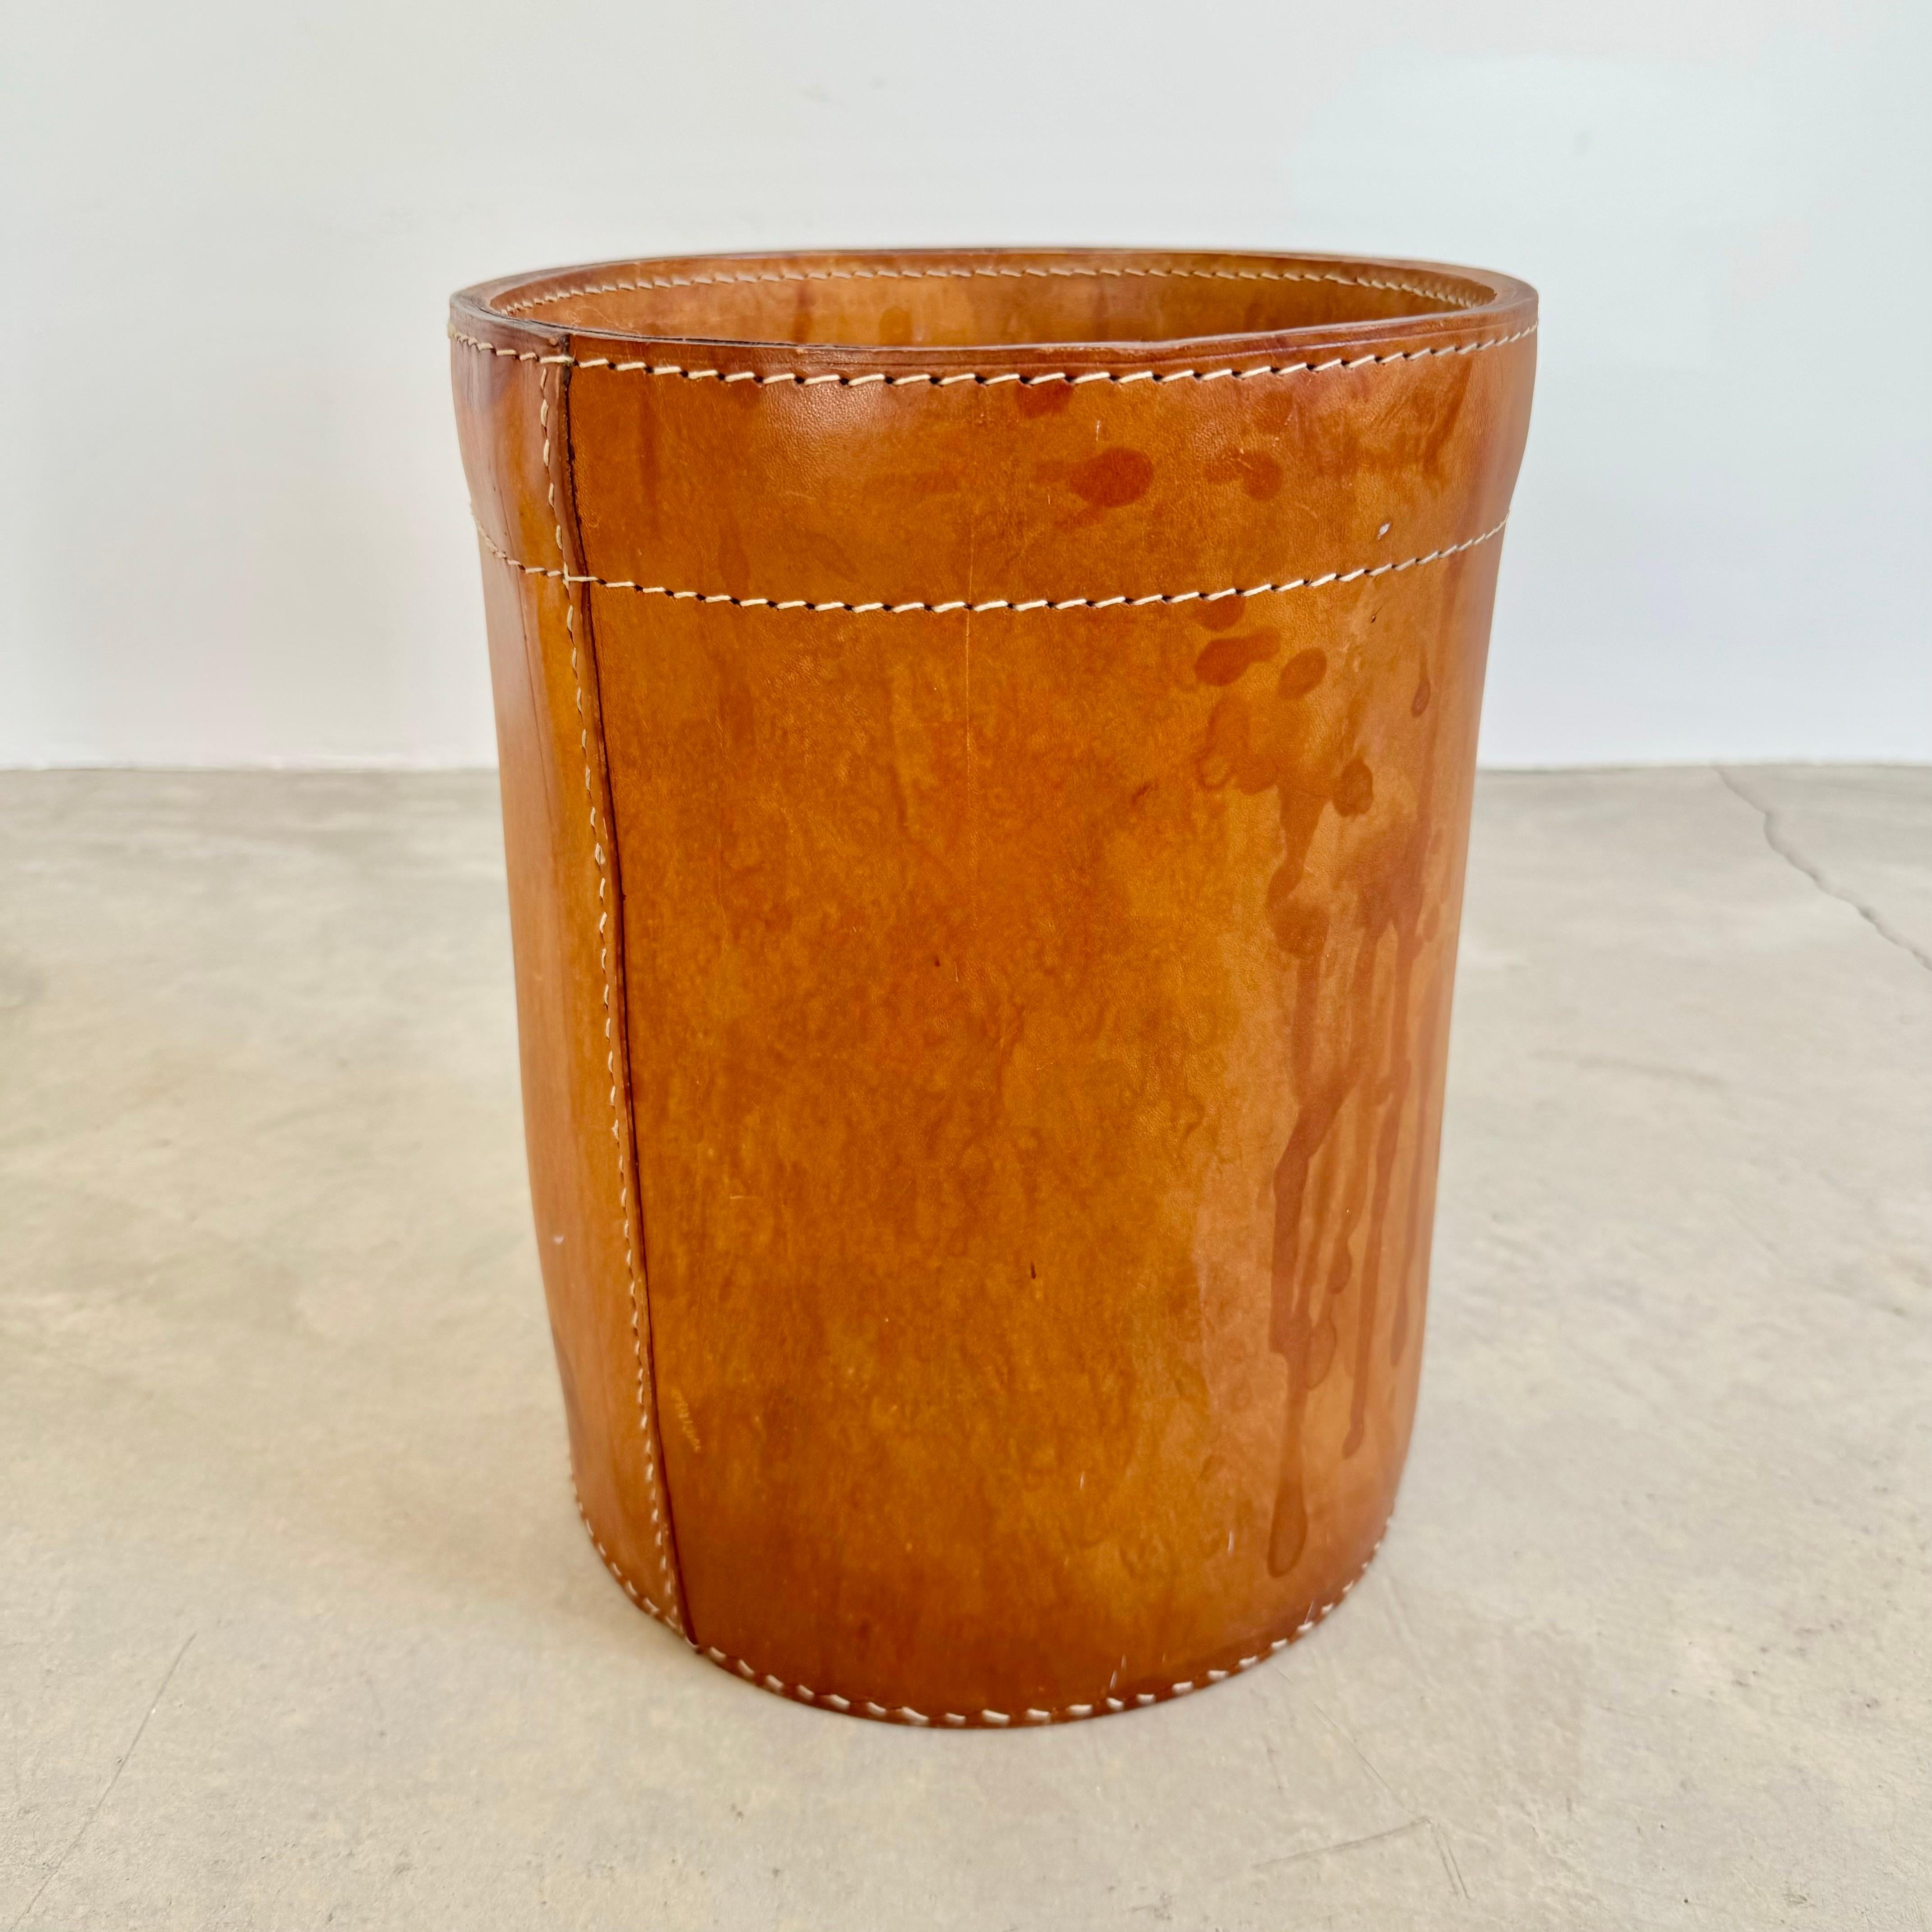 Jacques Adnet Style Saddle Leather Waste Basket, 1950s France For Sale 3